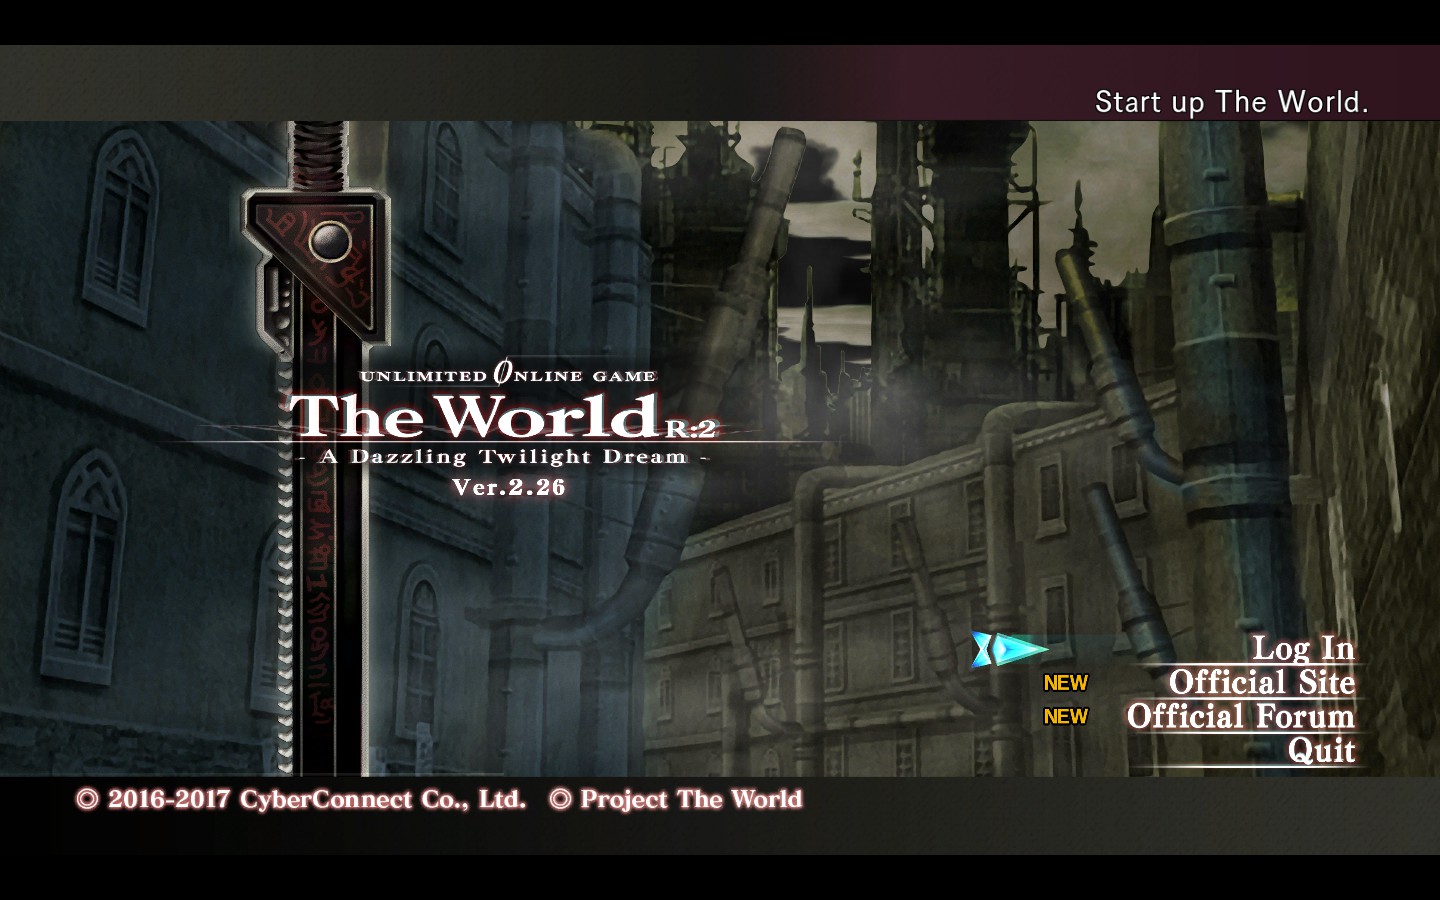 .Hack the World game. Hack the World. .Hack last Recode World Map. Hack last Recode achievement. Ай ласт ю май